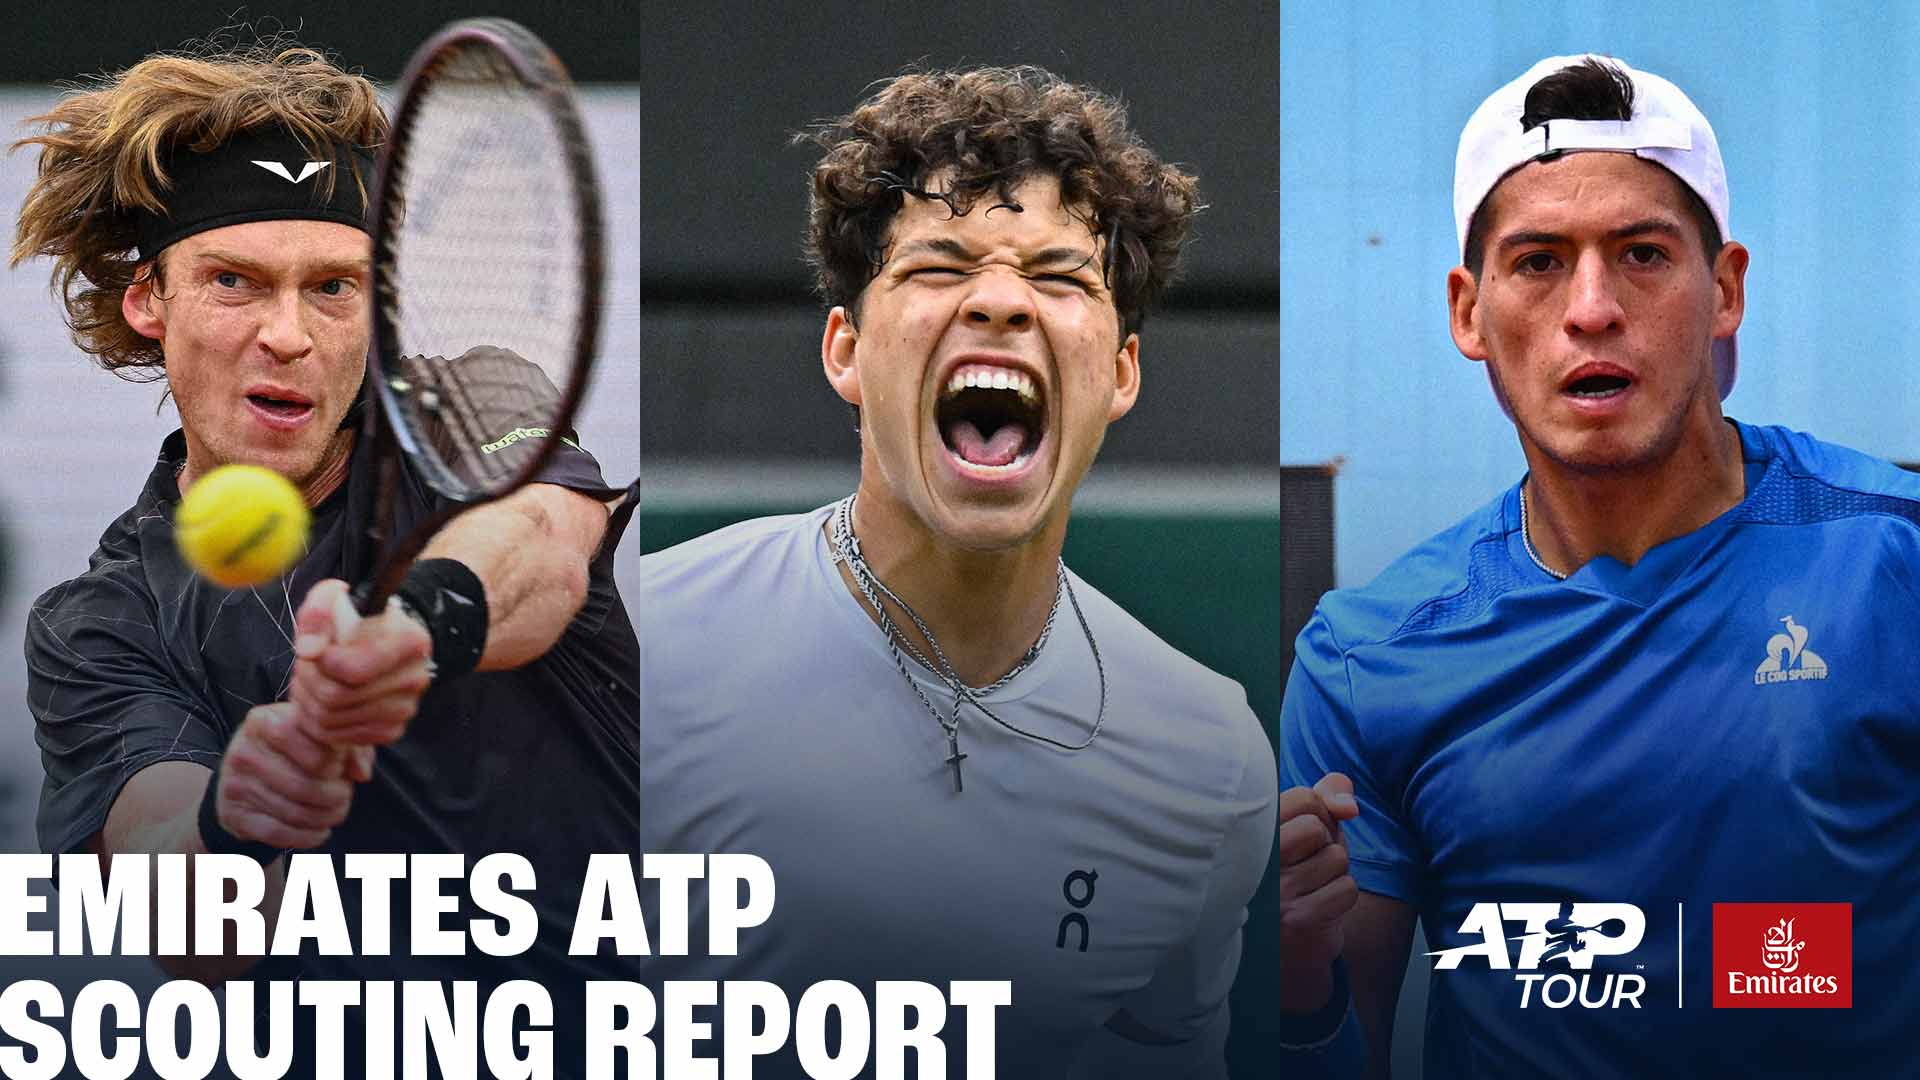 Andrey Rublev, Ben Shelton and Sebastian Baez are the top seeds at this week's three ATP Tour events.